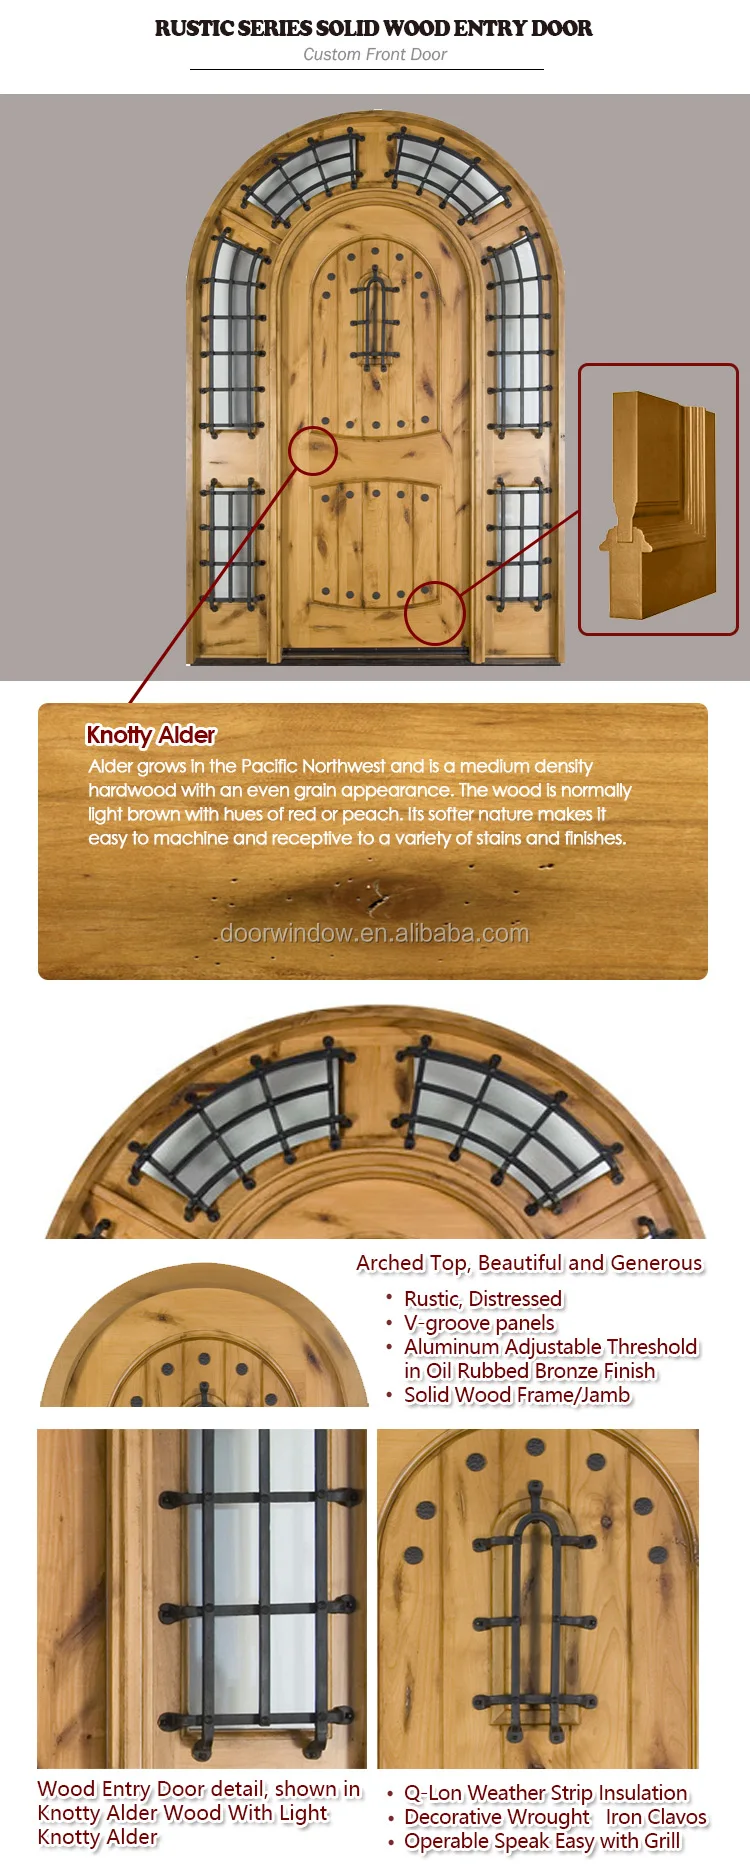 North America popular front french doors round top design with decorative wrought iron clavos